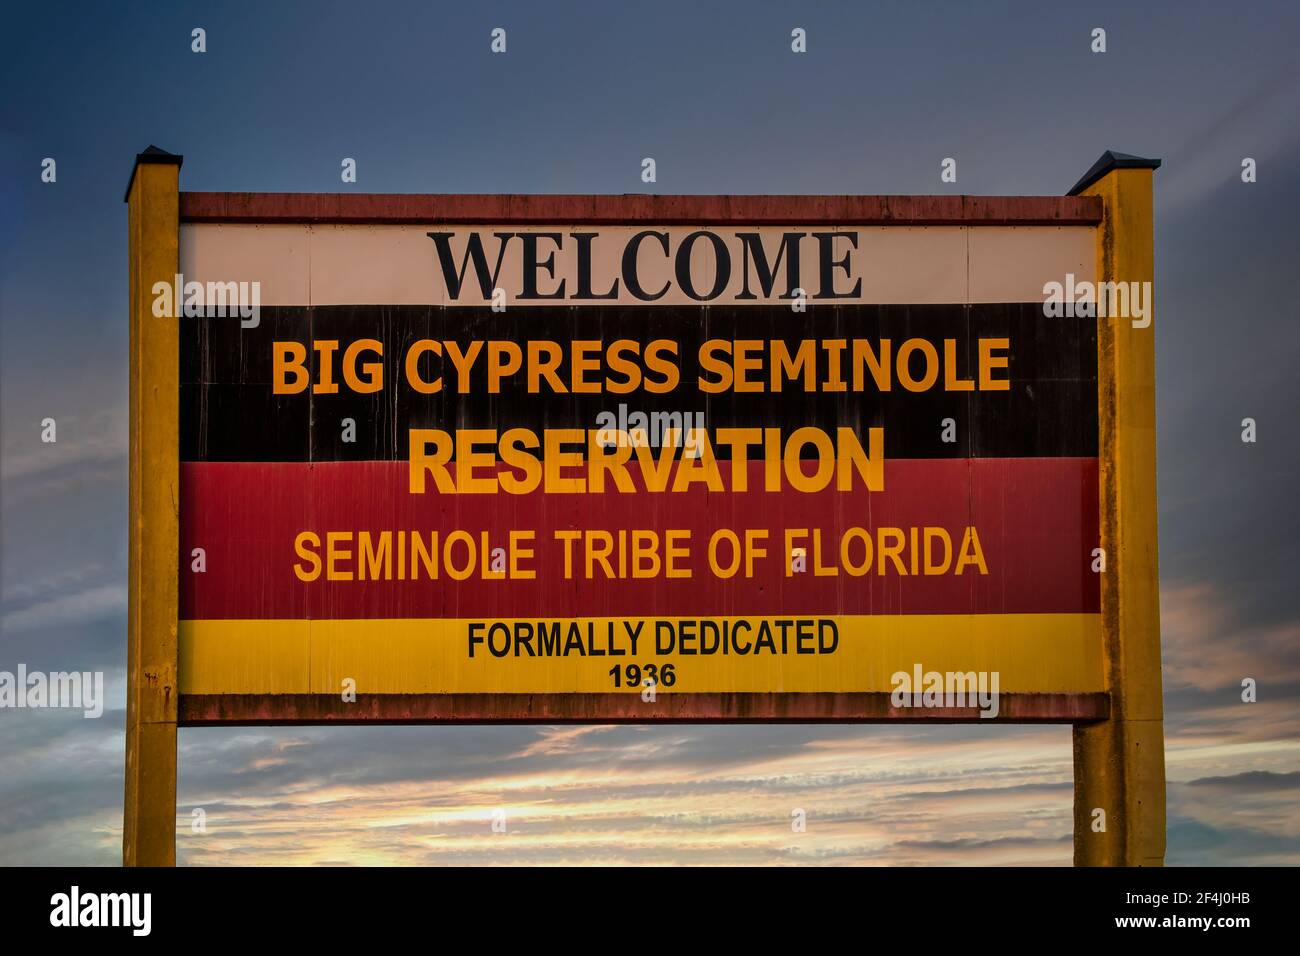 Entrance sign to the Big Cypress Seminole Reservation of the Seminole Tribe of Florida located off the Tamiami Trail in Clewiston. Stock Photo